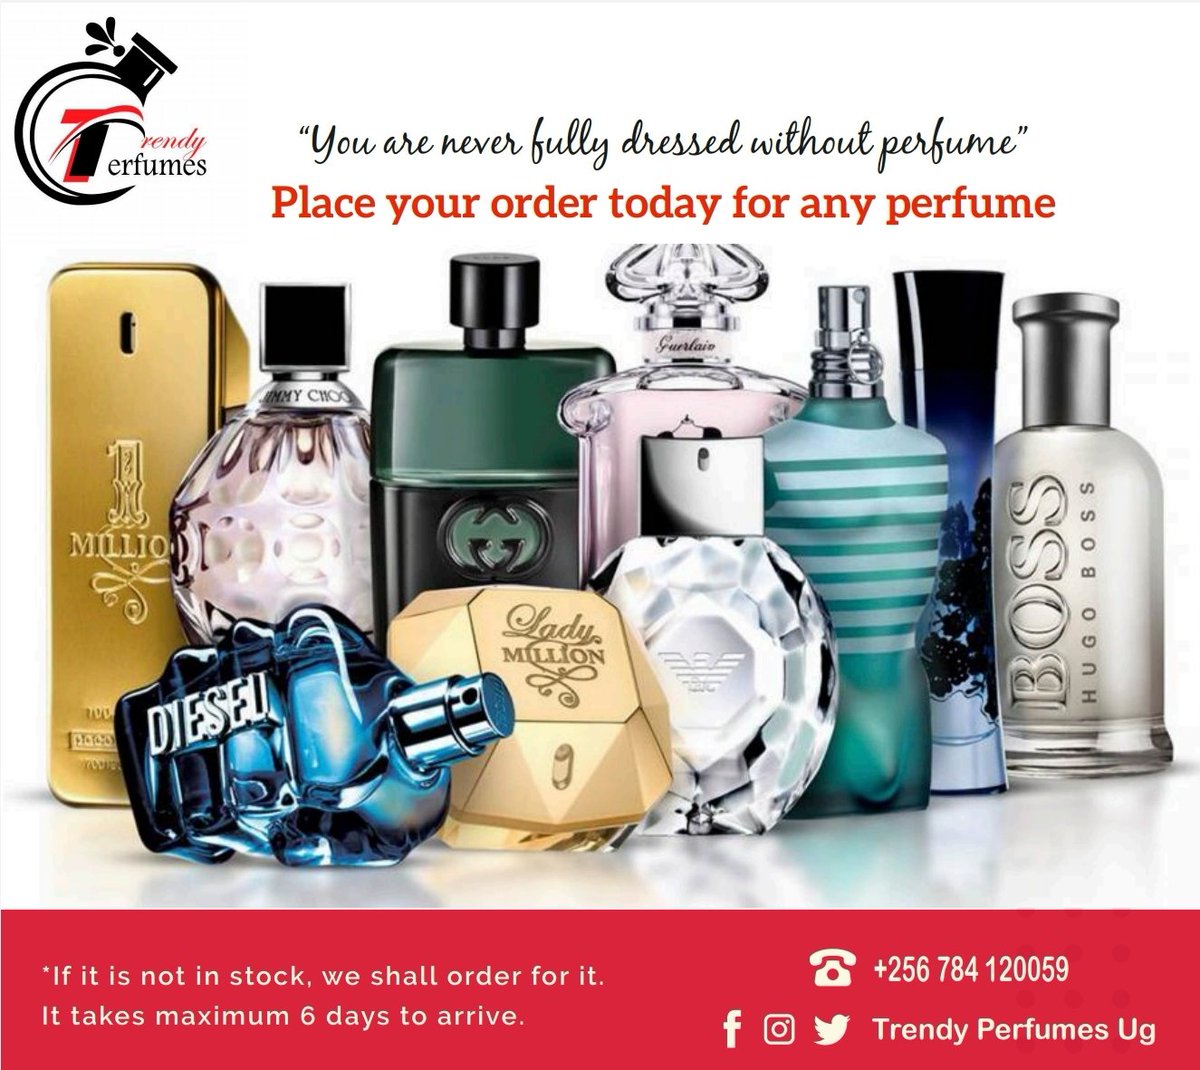 The No.1 perfume sellers in Uganda. We sell every nice fragrance at very addordable prices. Kindly contact 0784120059 to place an order. Payment is done when you receive the fragrance. Delivery is done that very day. #trendyperfumesug #smellgoodfeelgood #perfumes #fragrances